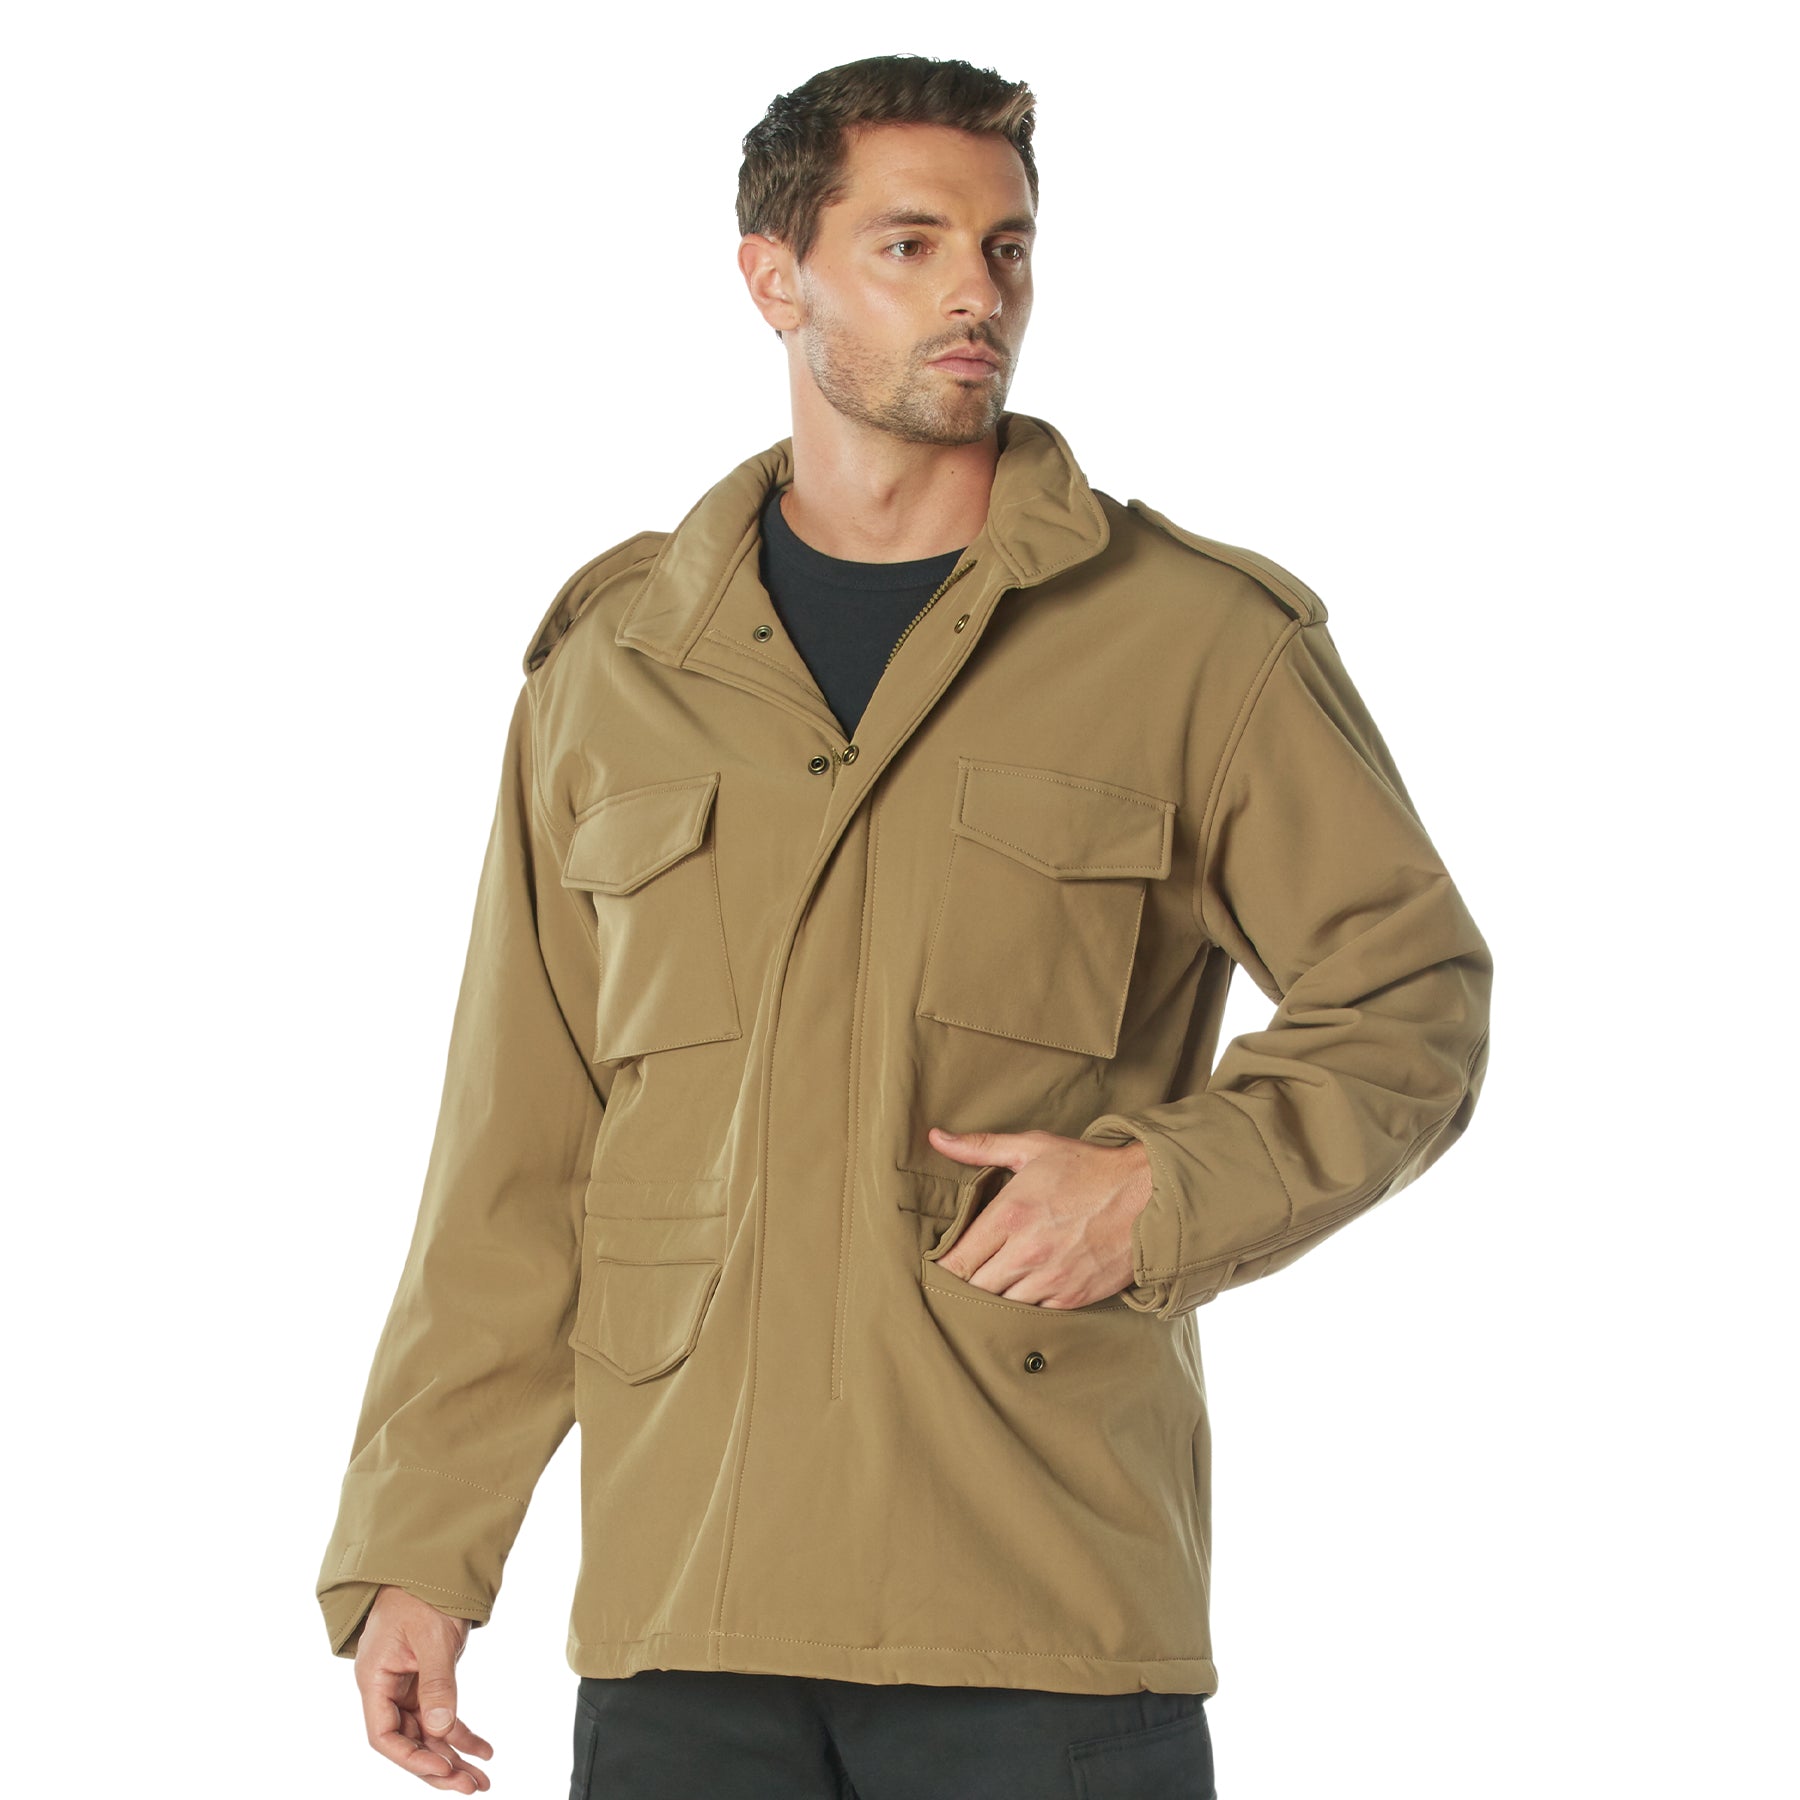 Poly Soft Shell Tactical M-65 Field Jackets Coyote Brown